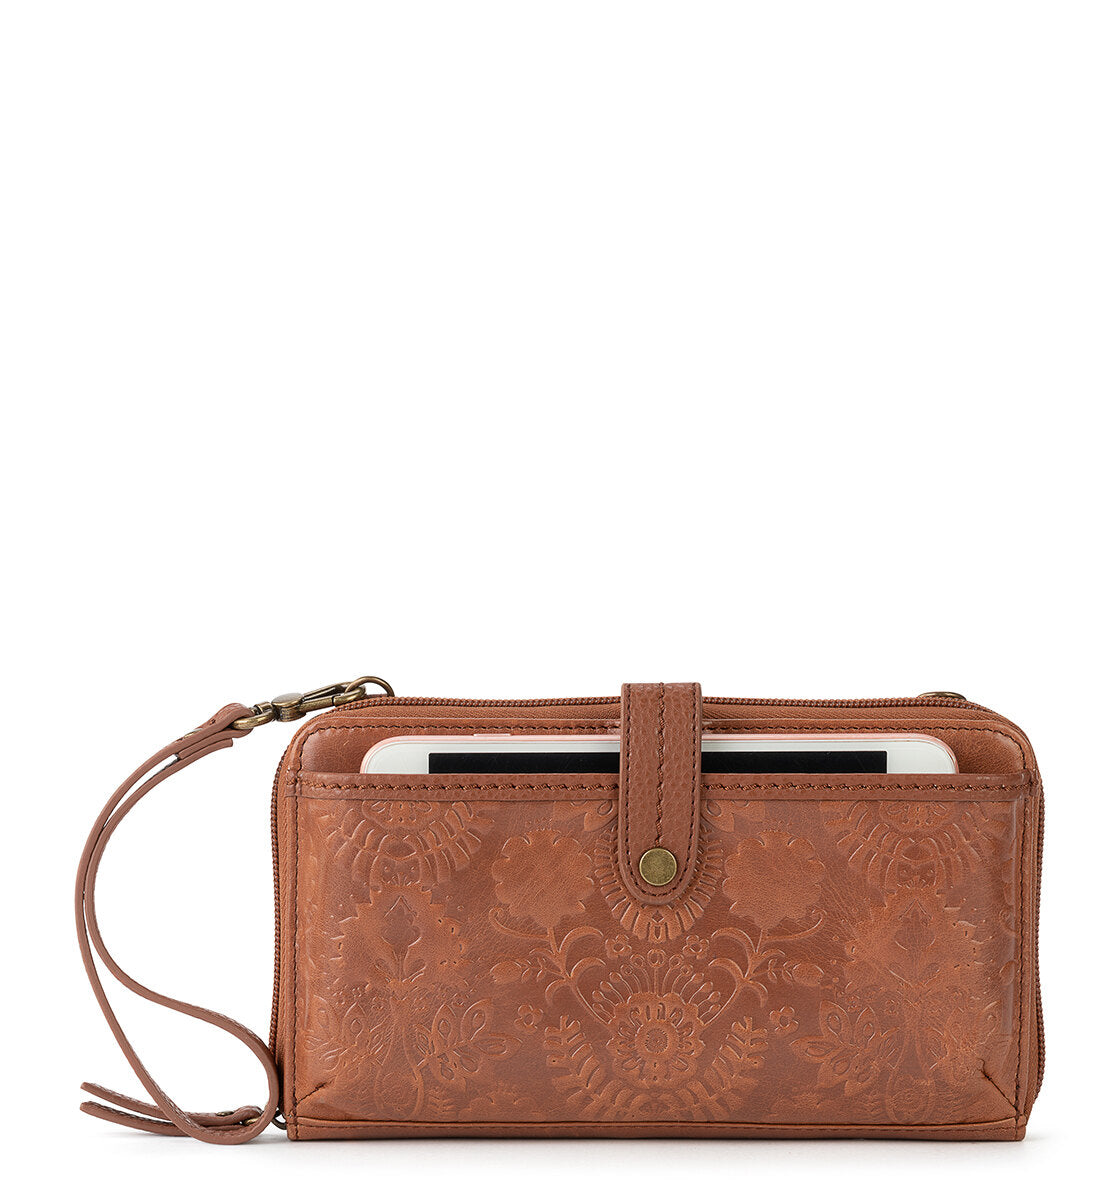 Tobacco Floral Embossed | Elegant Accessories in Rich Tobacco